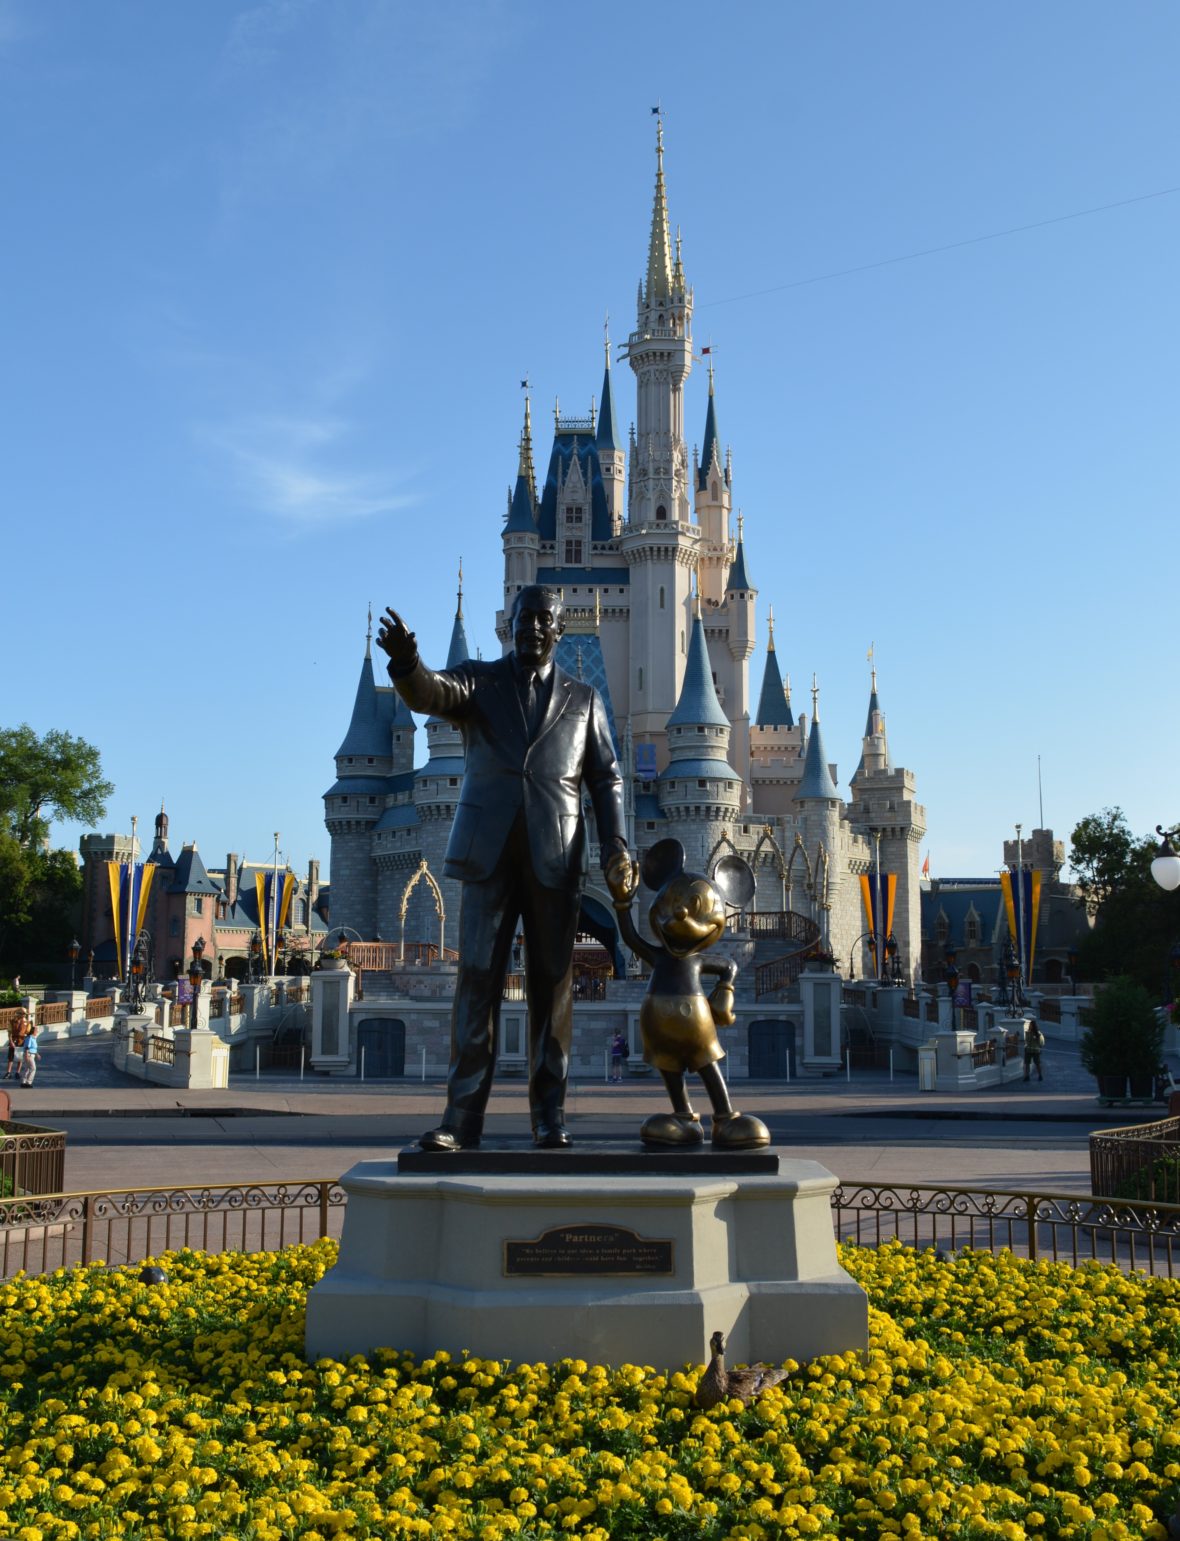 The Mickey and Walt Statue in front of Cinderella Castle in Walt Disney World